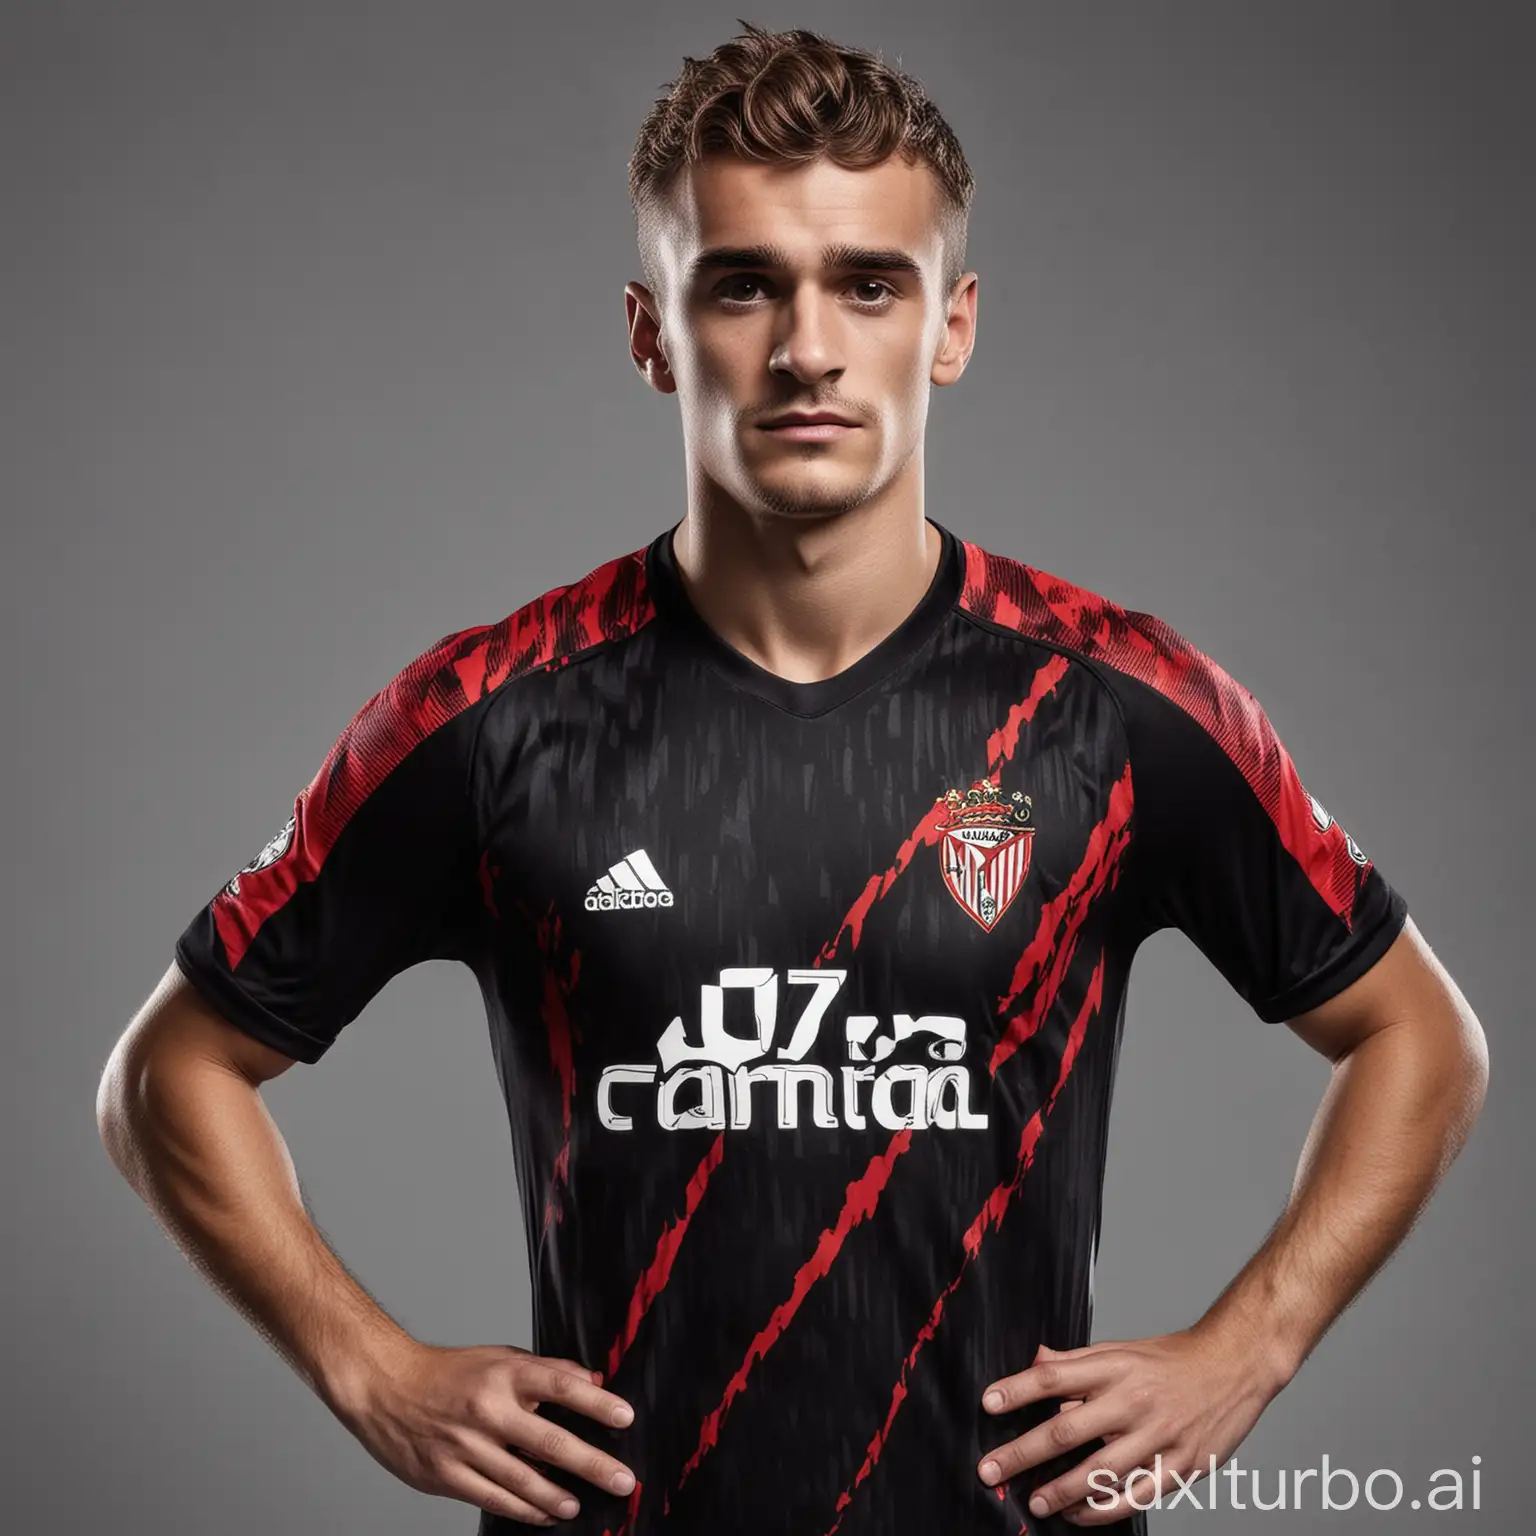 Antoine-Griezmann-Modeling-Black-Soccer-Jersey-with-Red-Accents